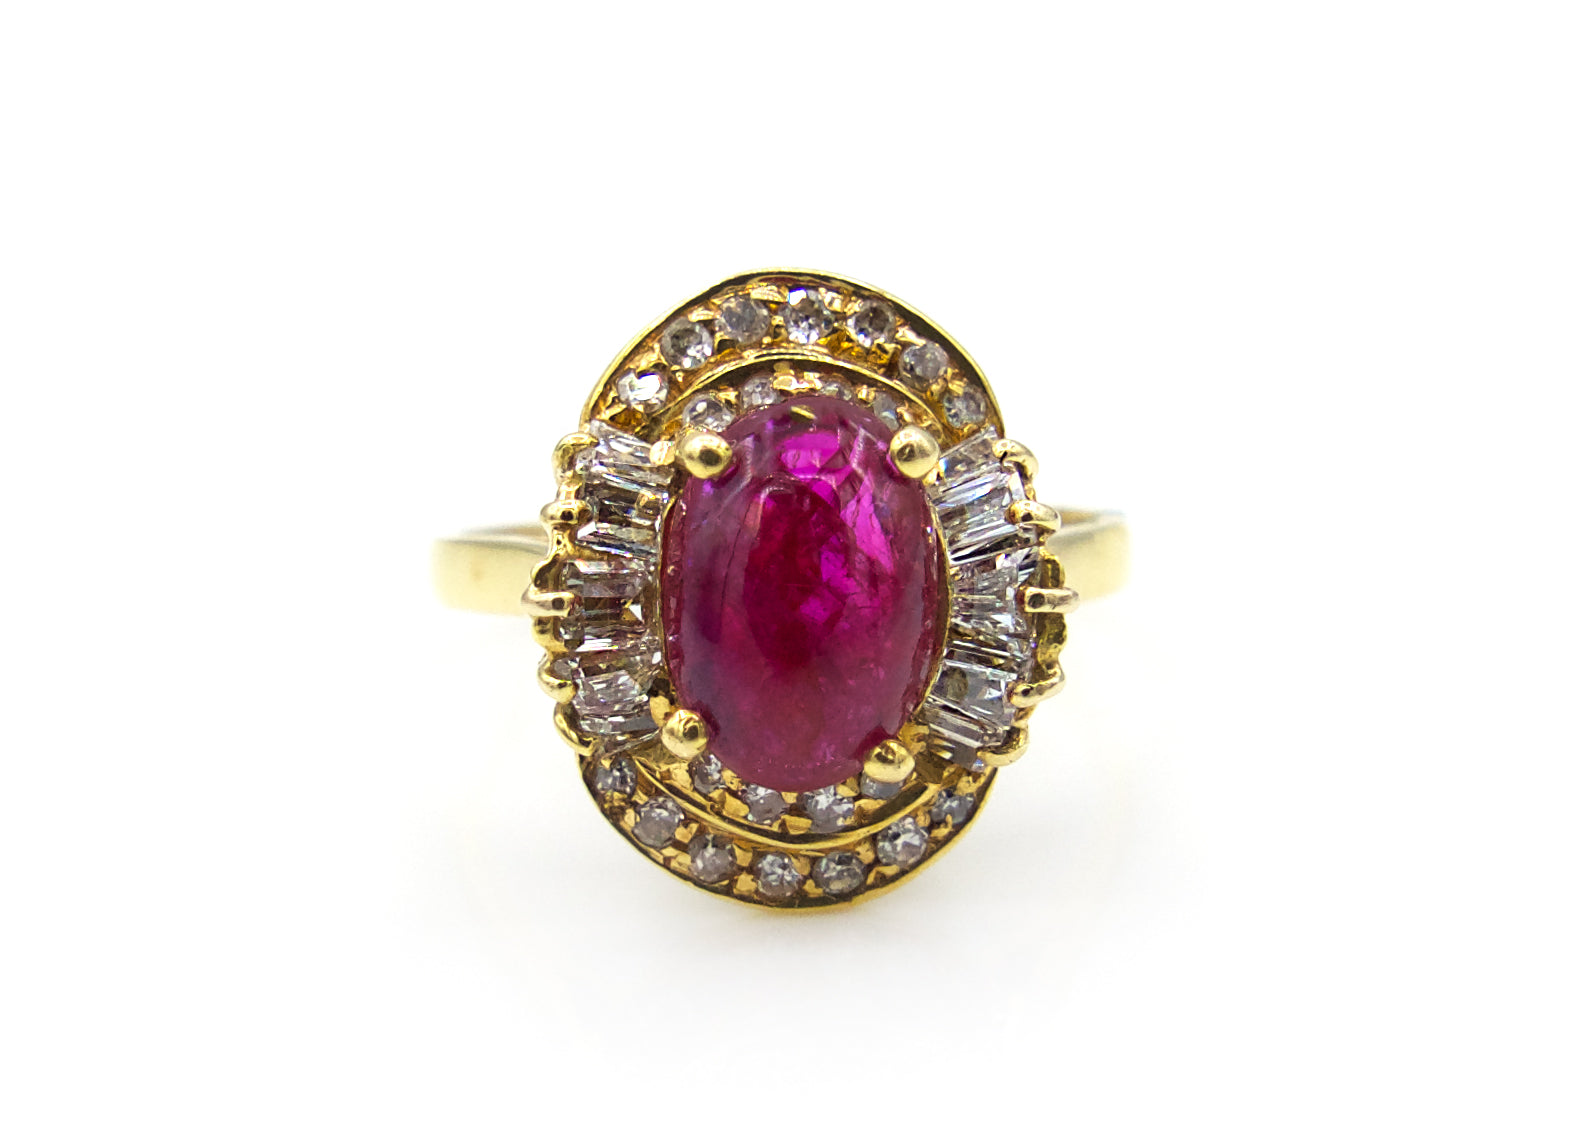 Vintage Cabochon Ruby Diamond Cocktail Ring